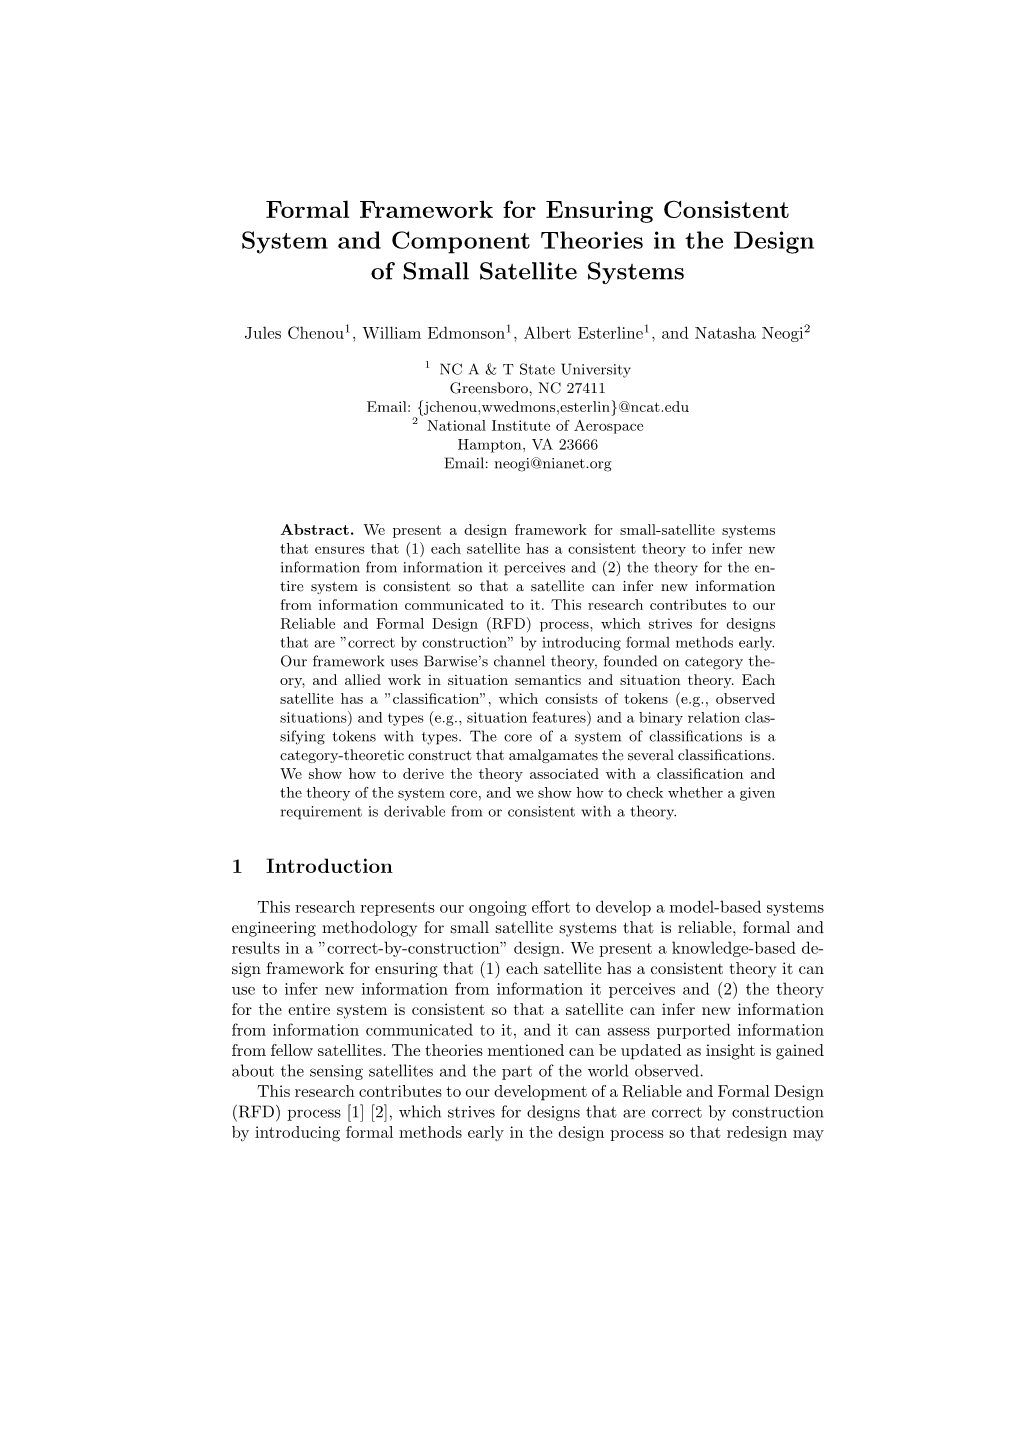 Formal Framework for Ensuring Consistent System and Component Theories in the Design of Small Satellite Systems